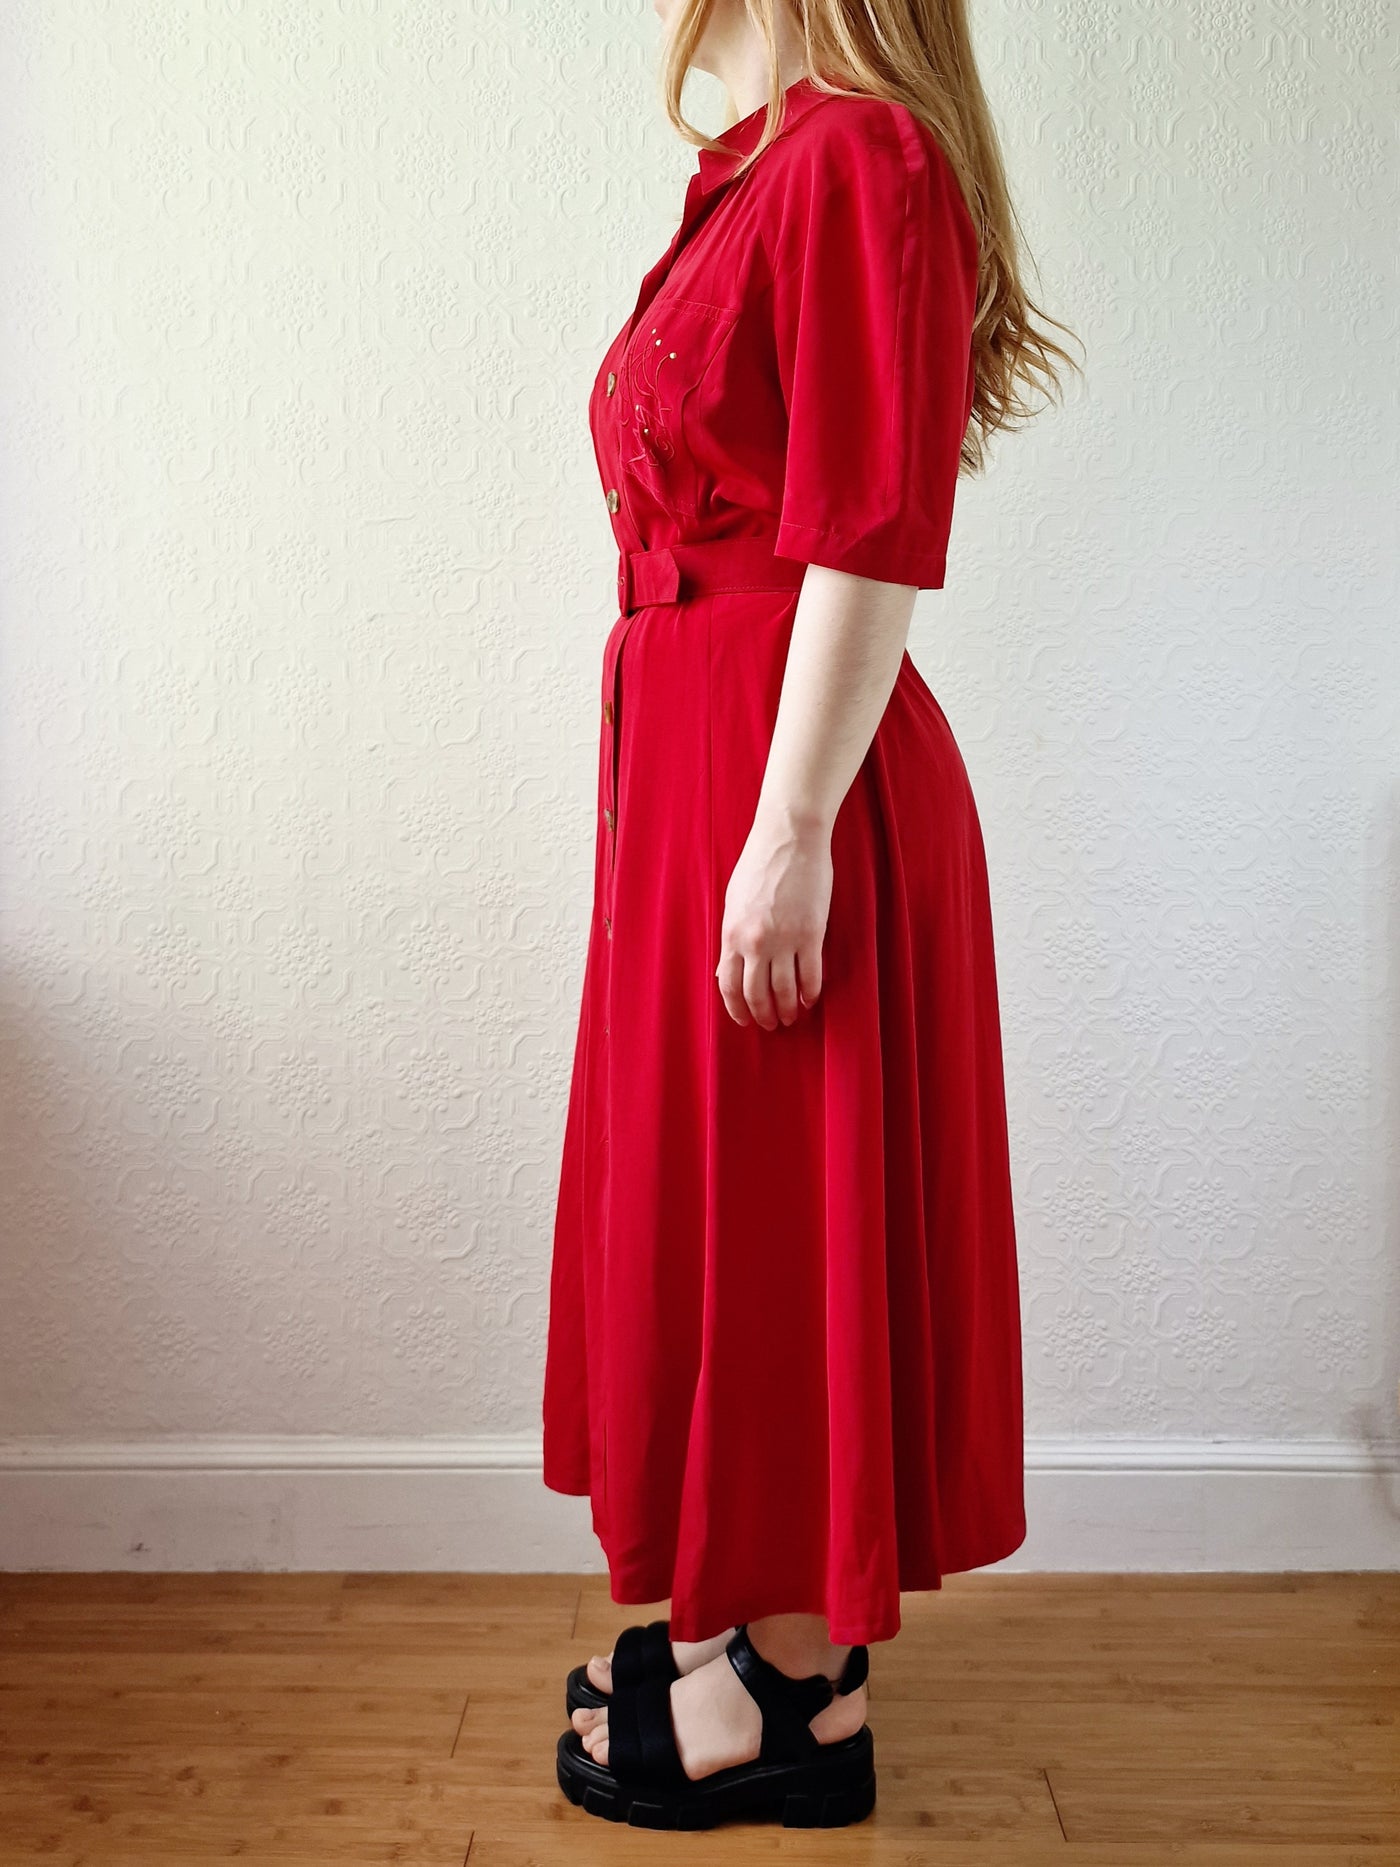 Vintage 80s Cherry Red Midi Dress with Short Sleeves - M